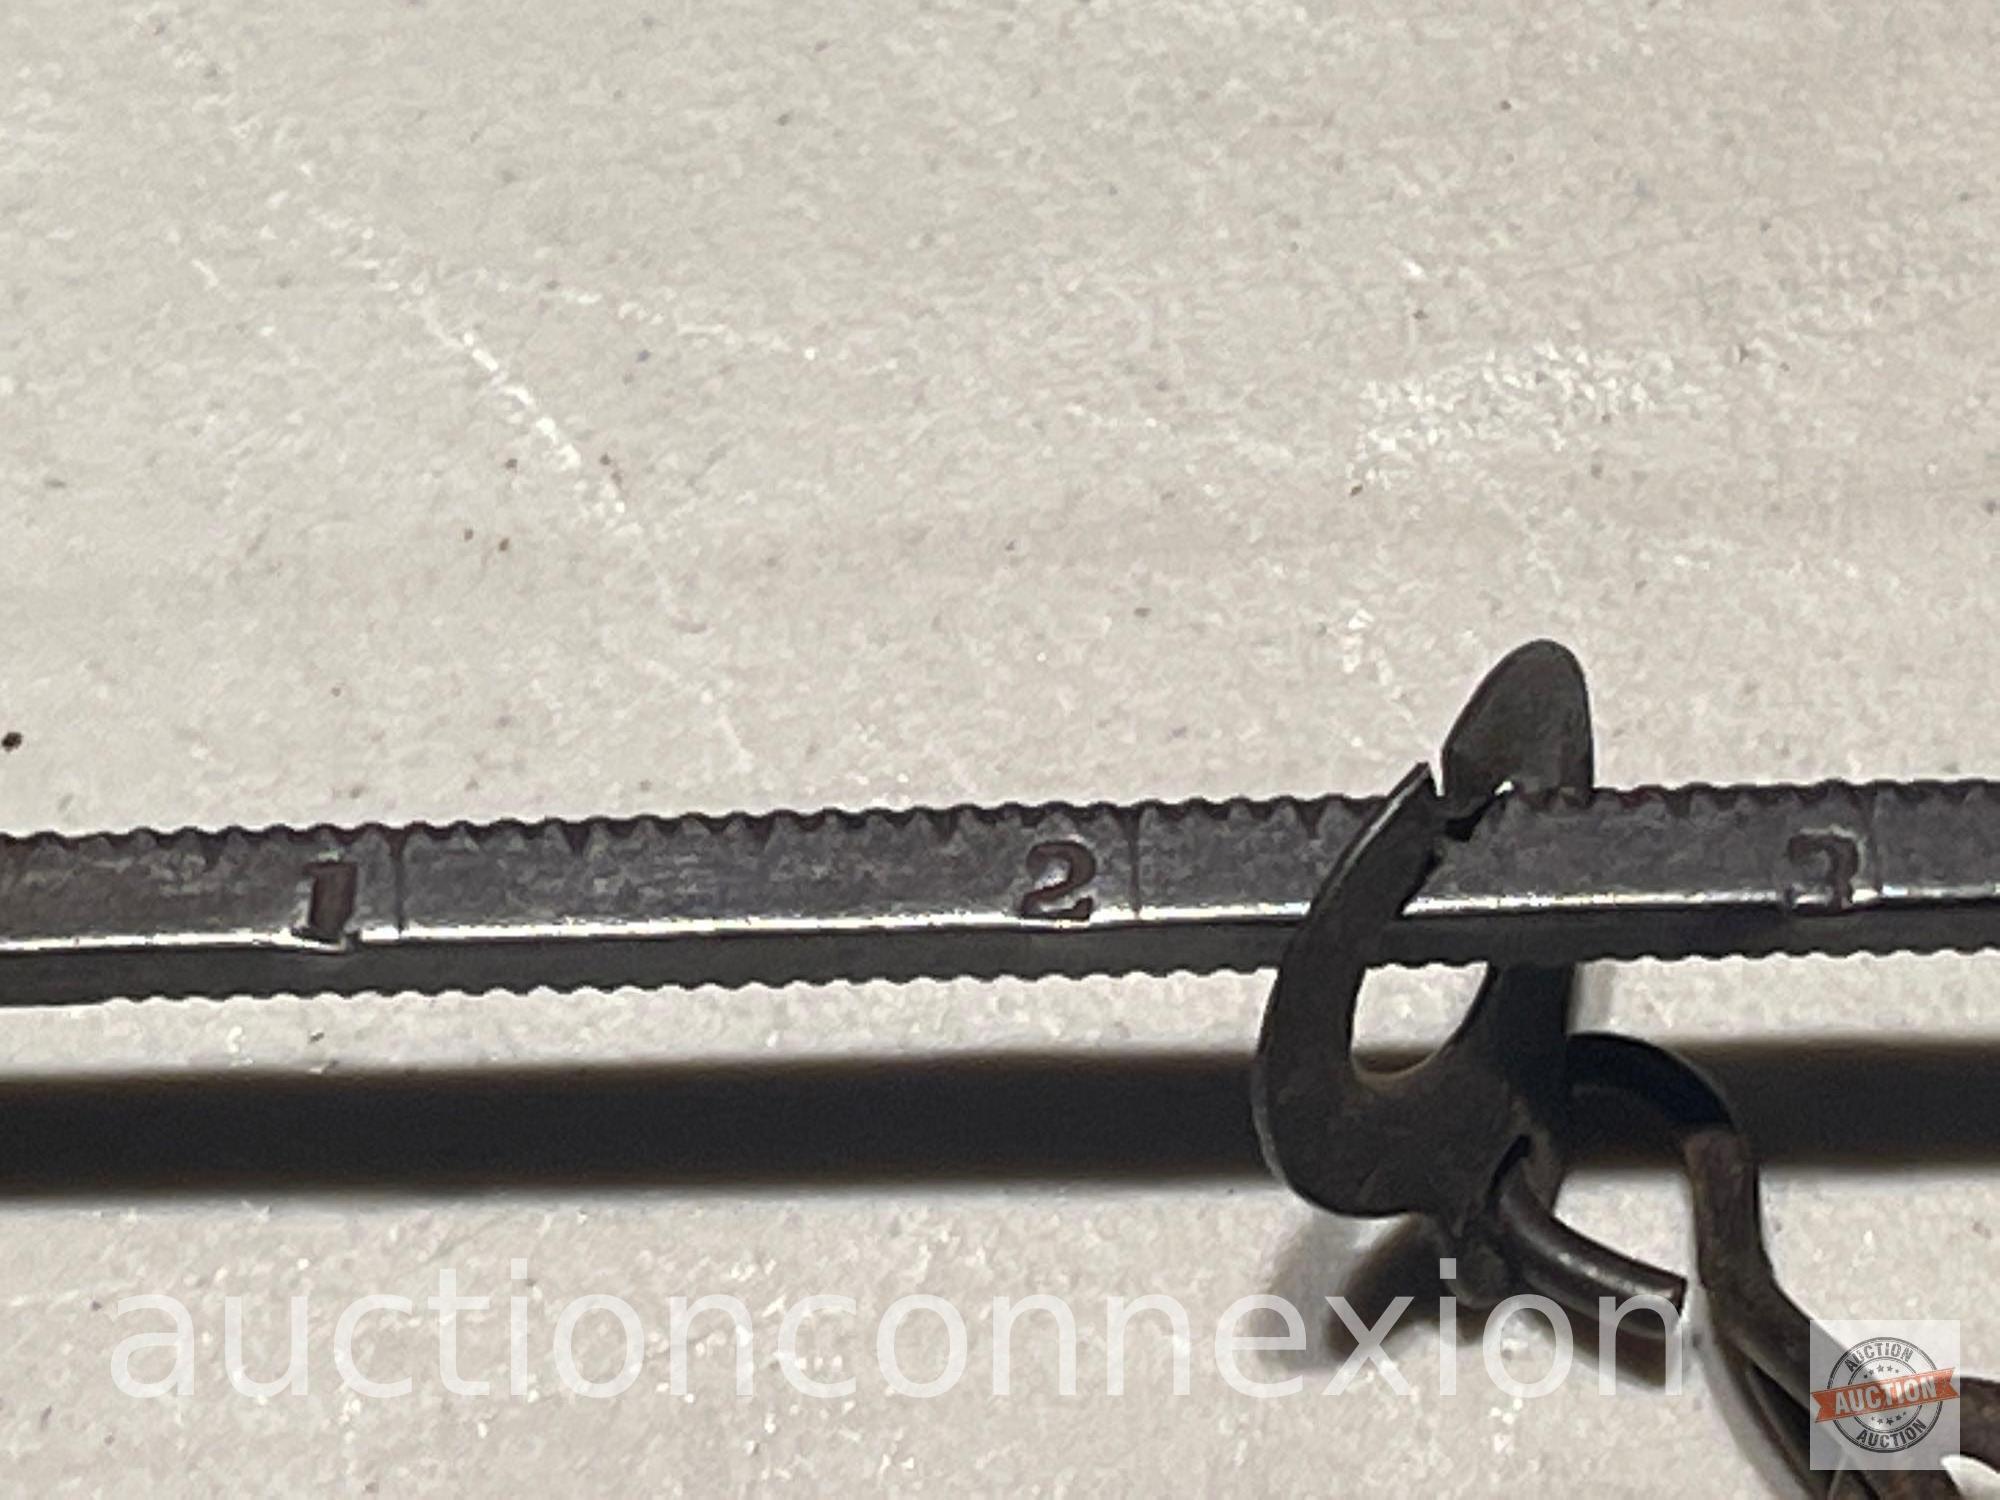 Vintage cast iron Balance scale with 3 hooks, Cotton or small Hide, Star Mark, 10 - 50 lbs, 17"